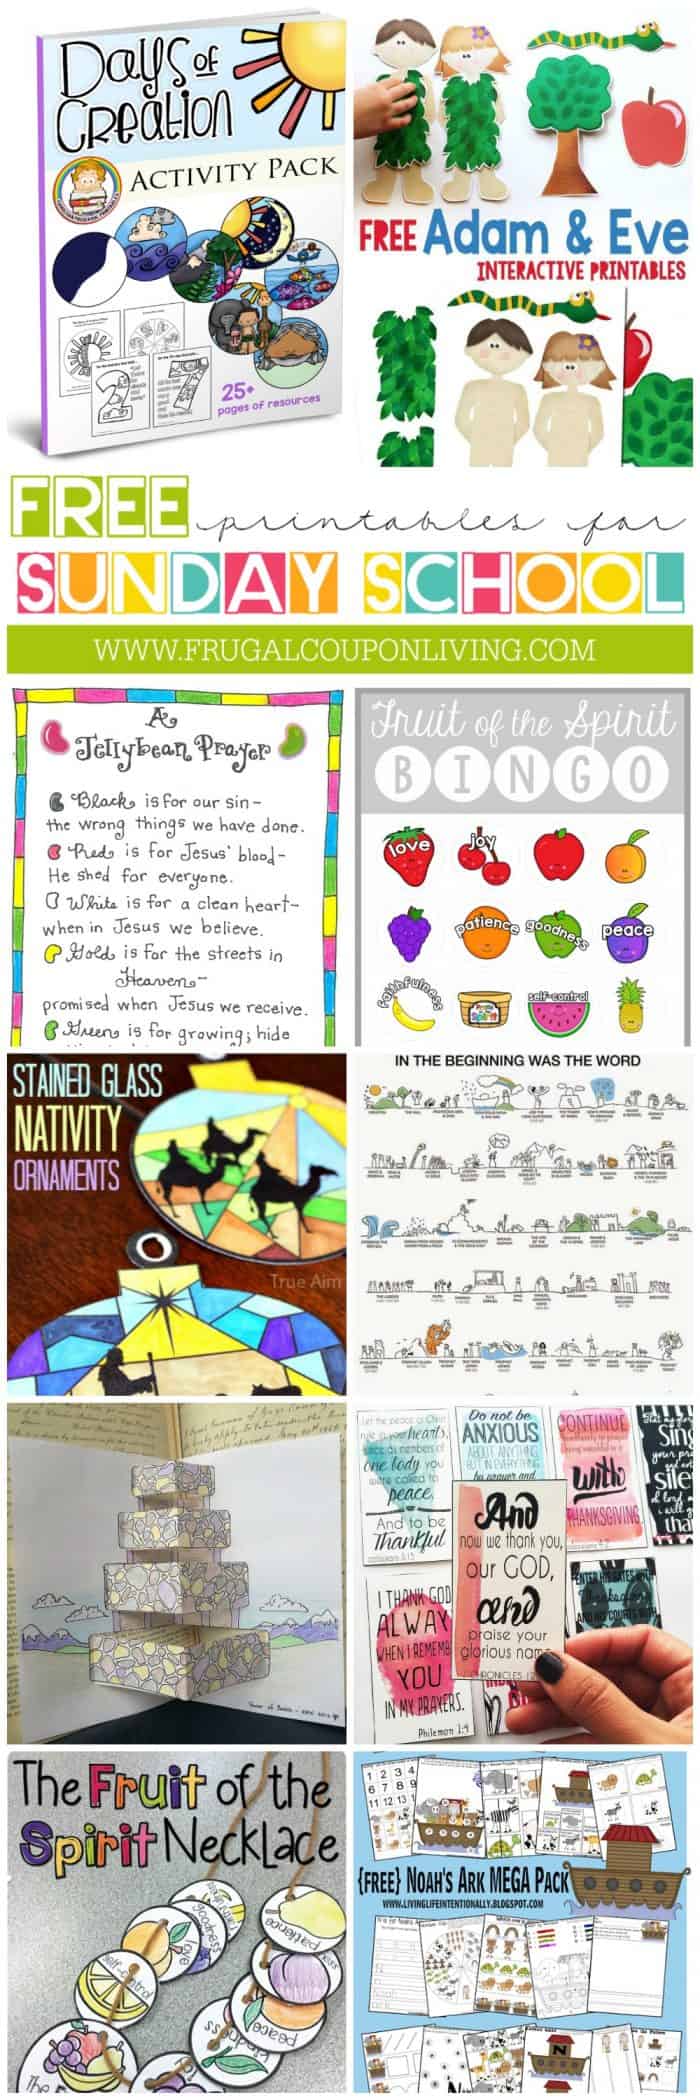 sunday-school-printables-frugal-coupon-living-long